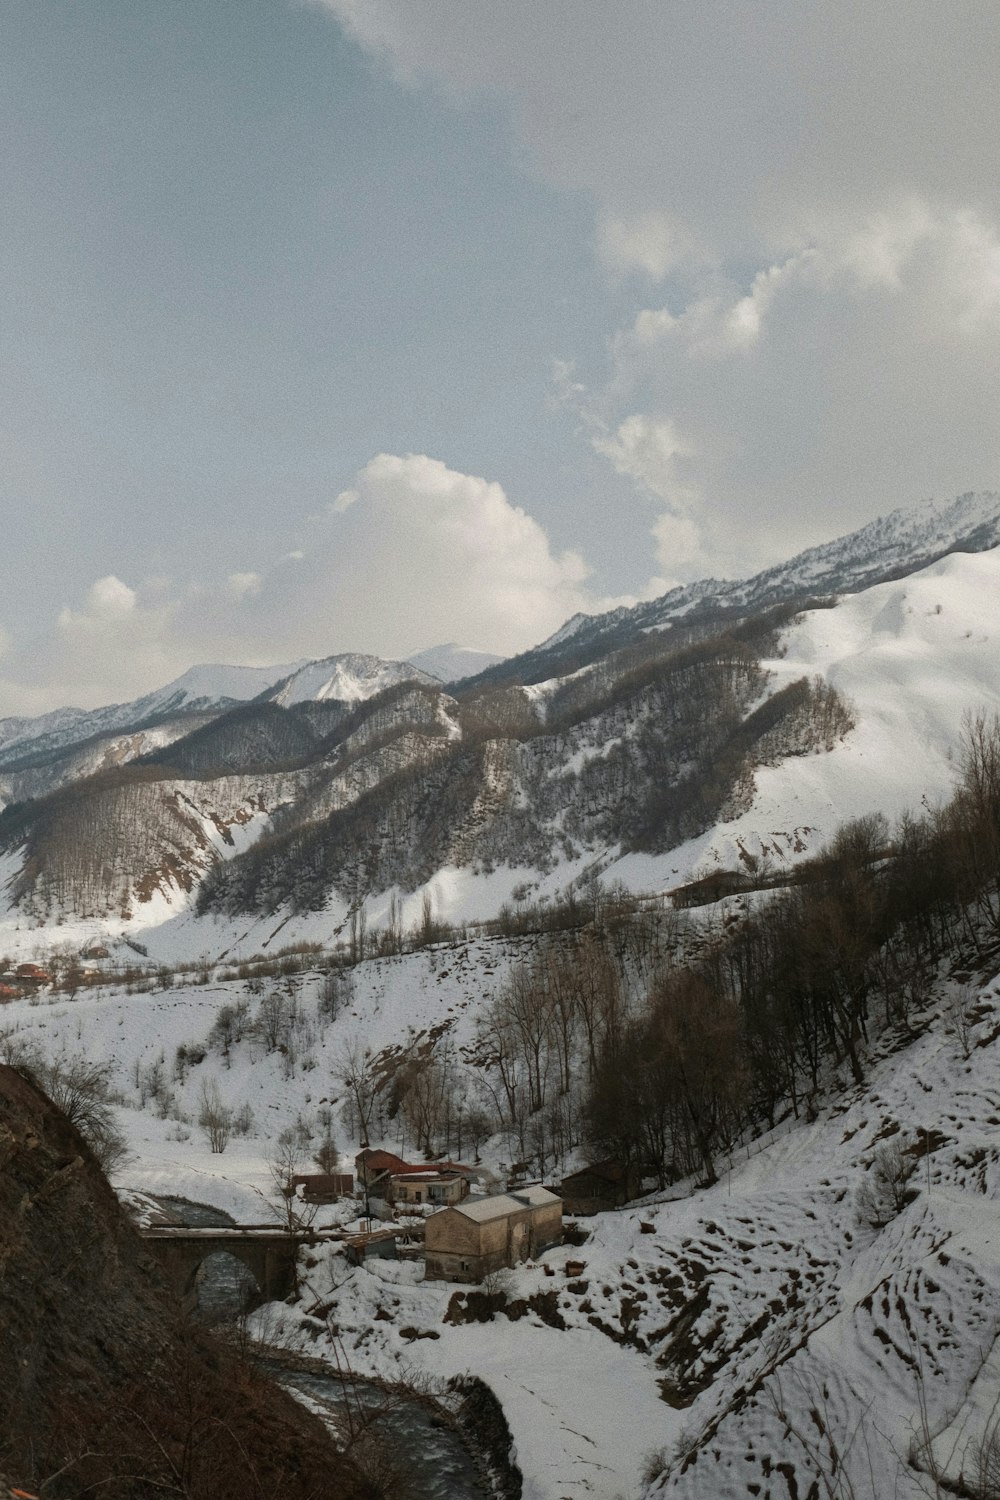 a view of a snowy mountain with a bridge in the foreground